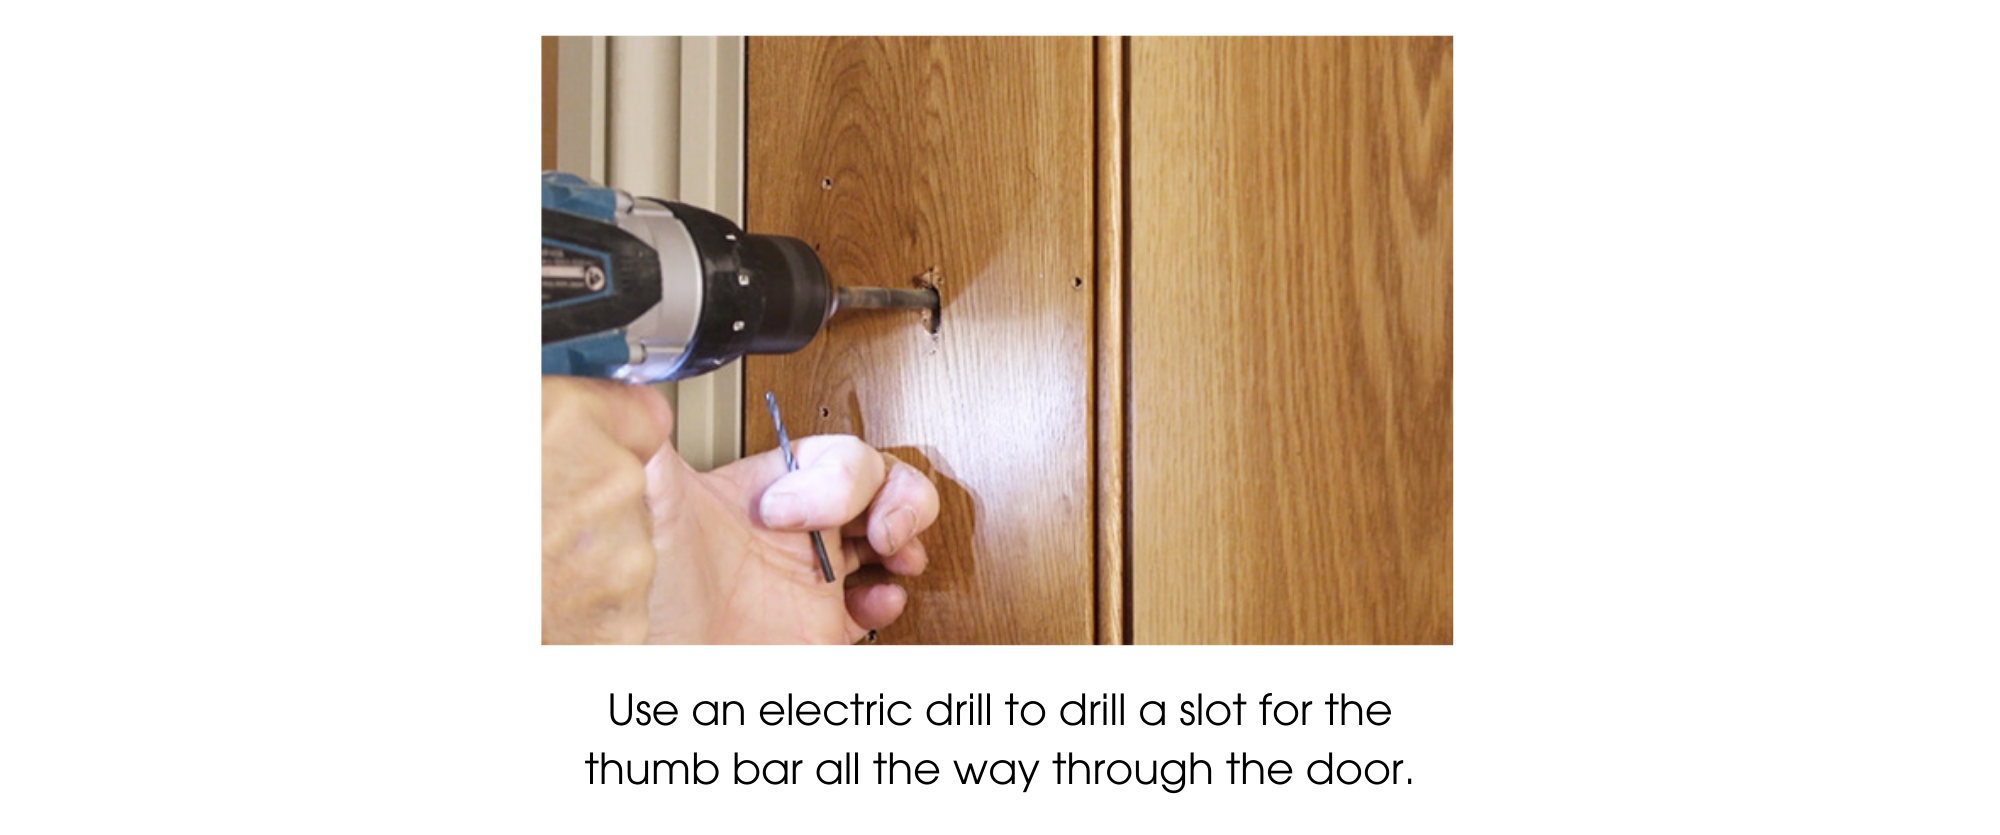 Person using an electric drill to drill a hole in a ledge and brace door to fit the thumb bar part of a thumb latch.